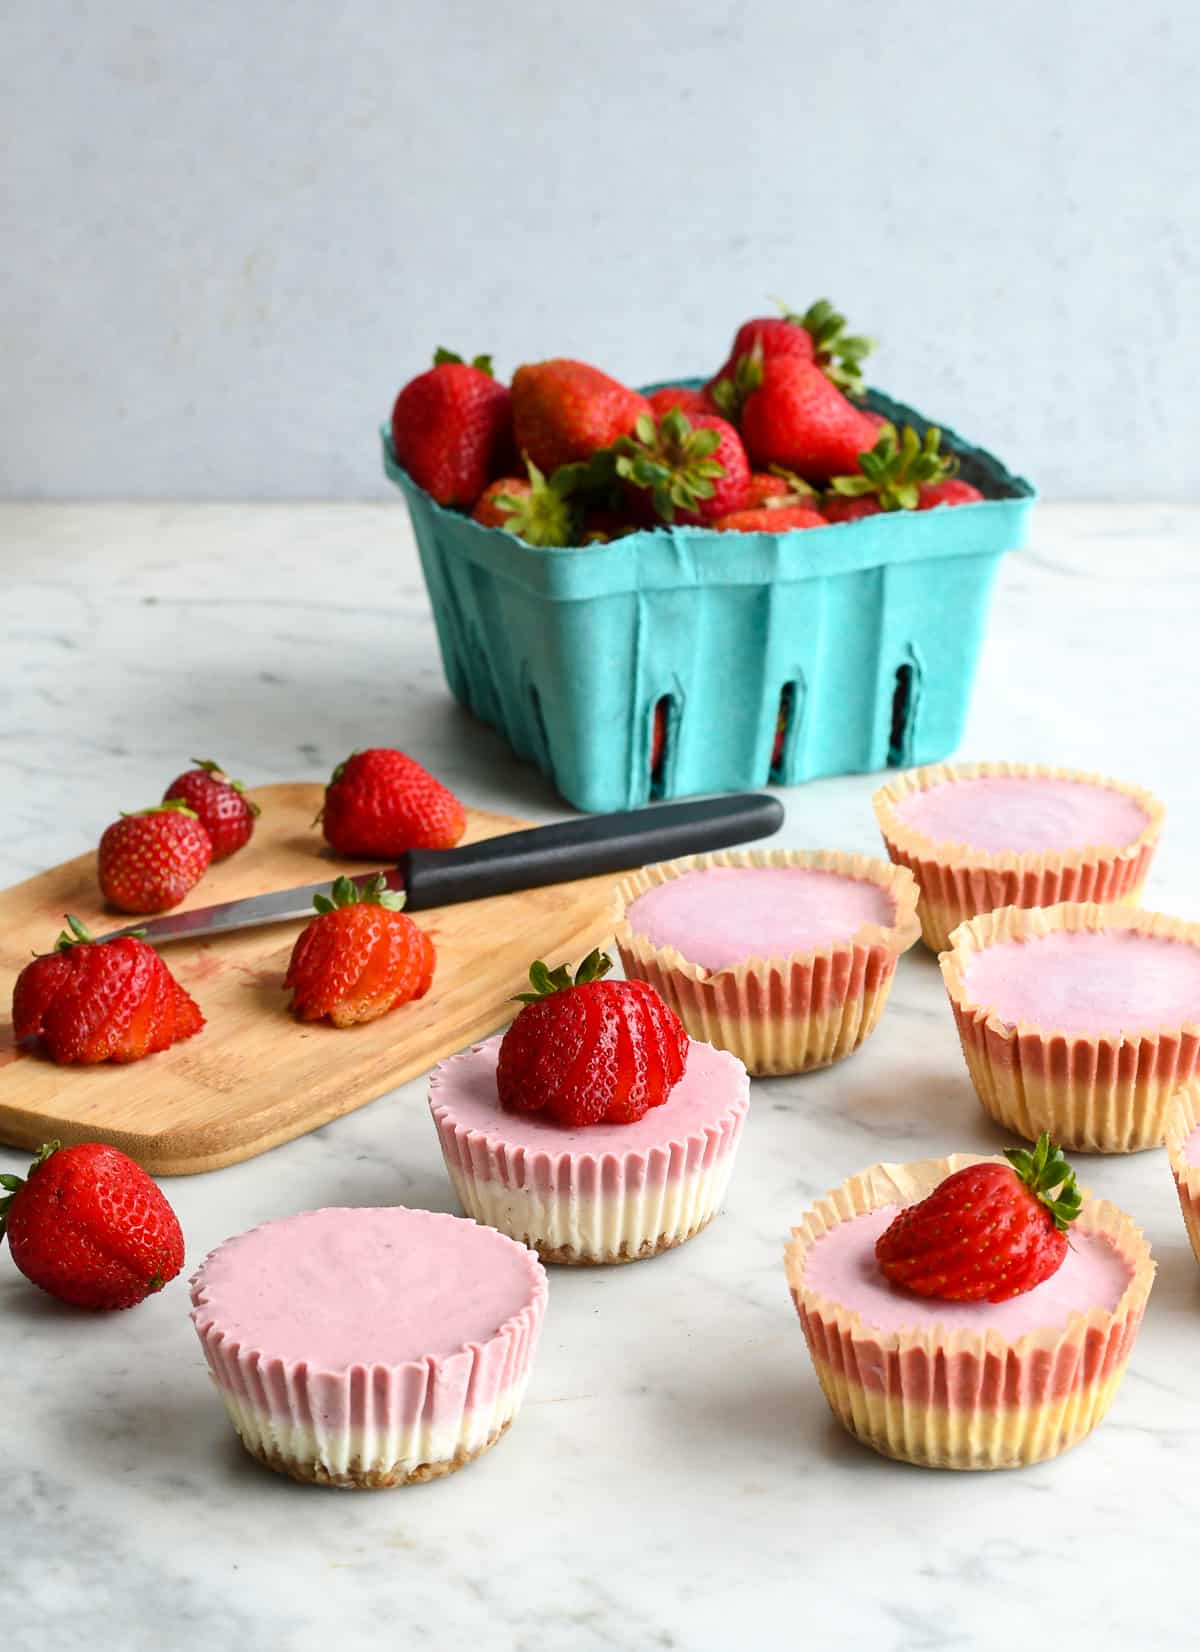 Mini Strawberry Cheesecakes with c cutting board making strawberry fans and a basket of fresh strawberries